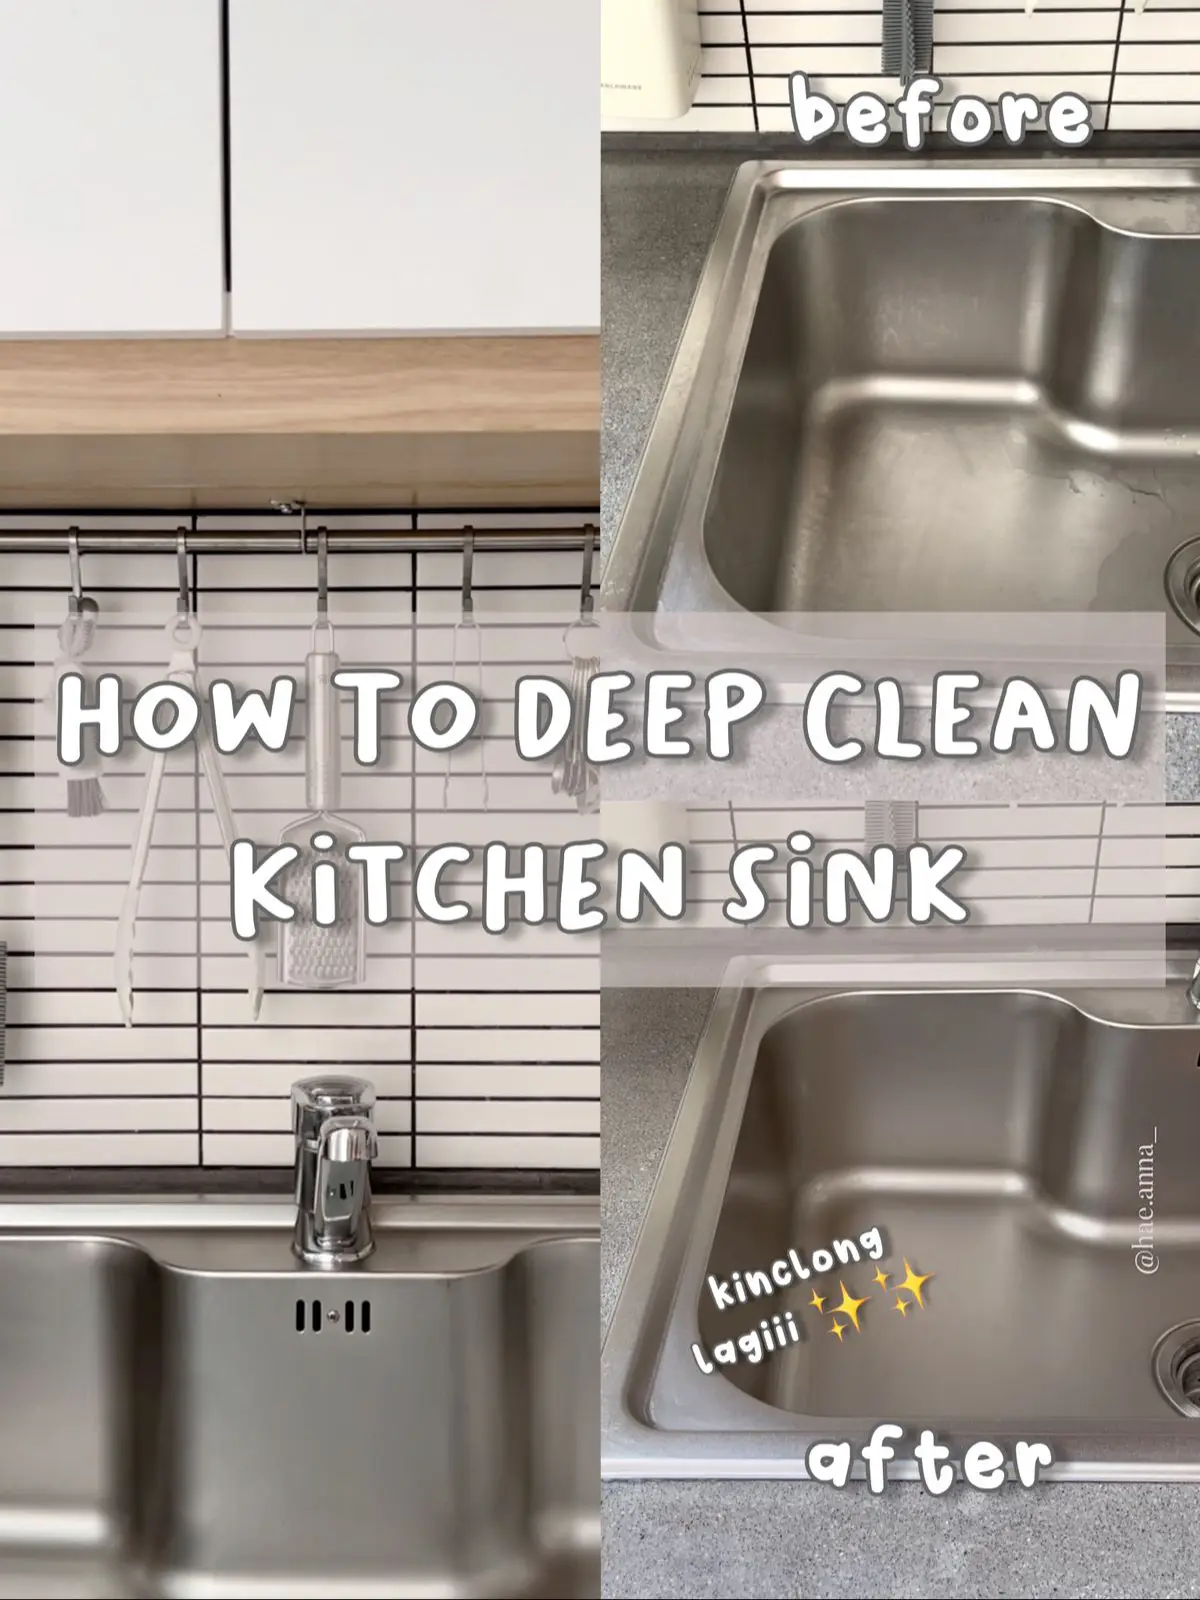 Is there a way to unscrew this kitchen sink drain? 🙏 : r/howto